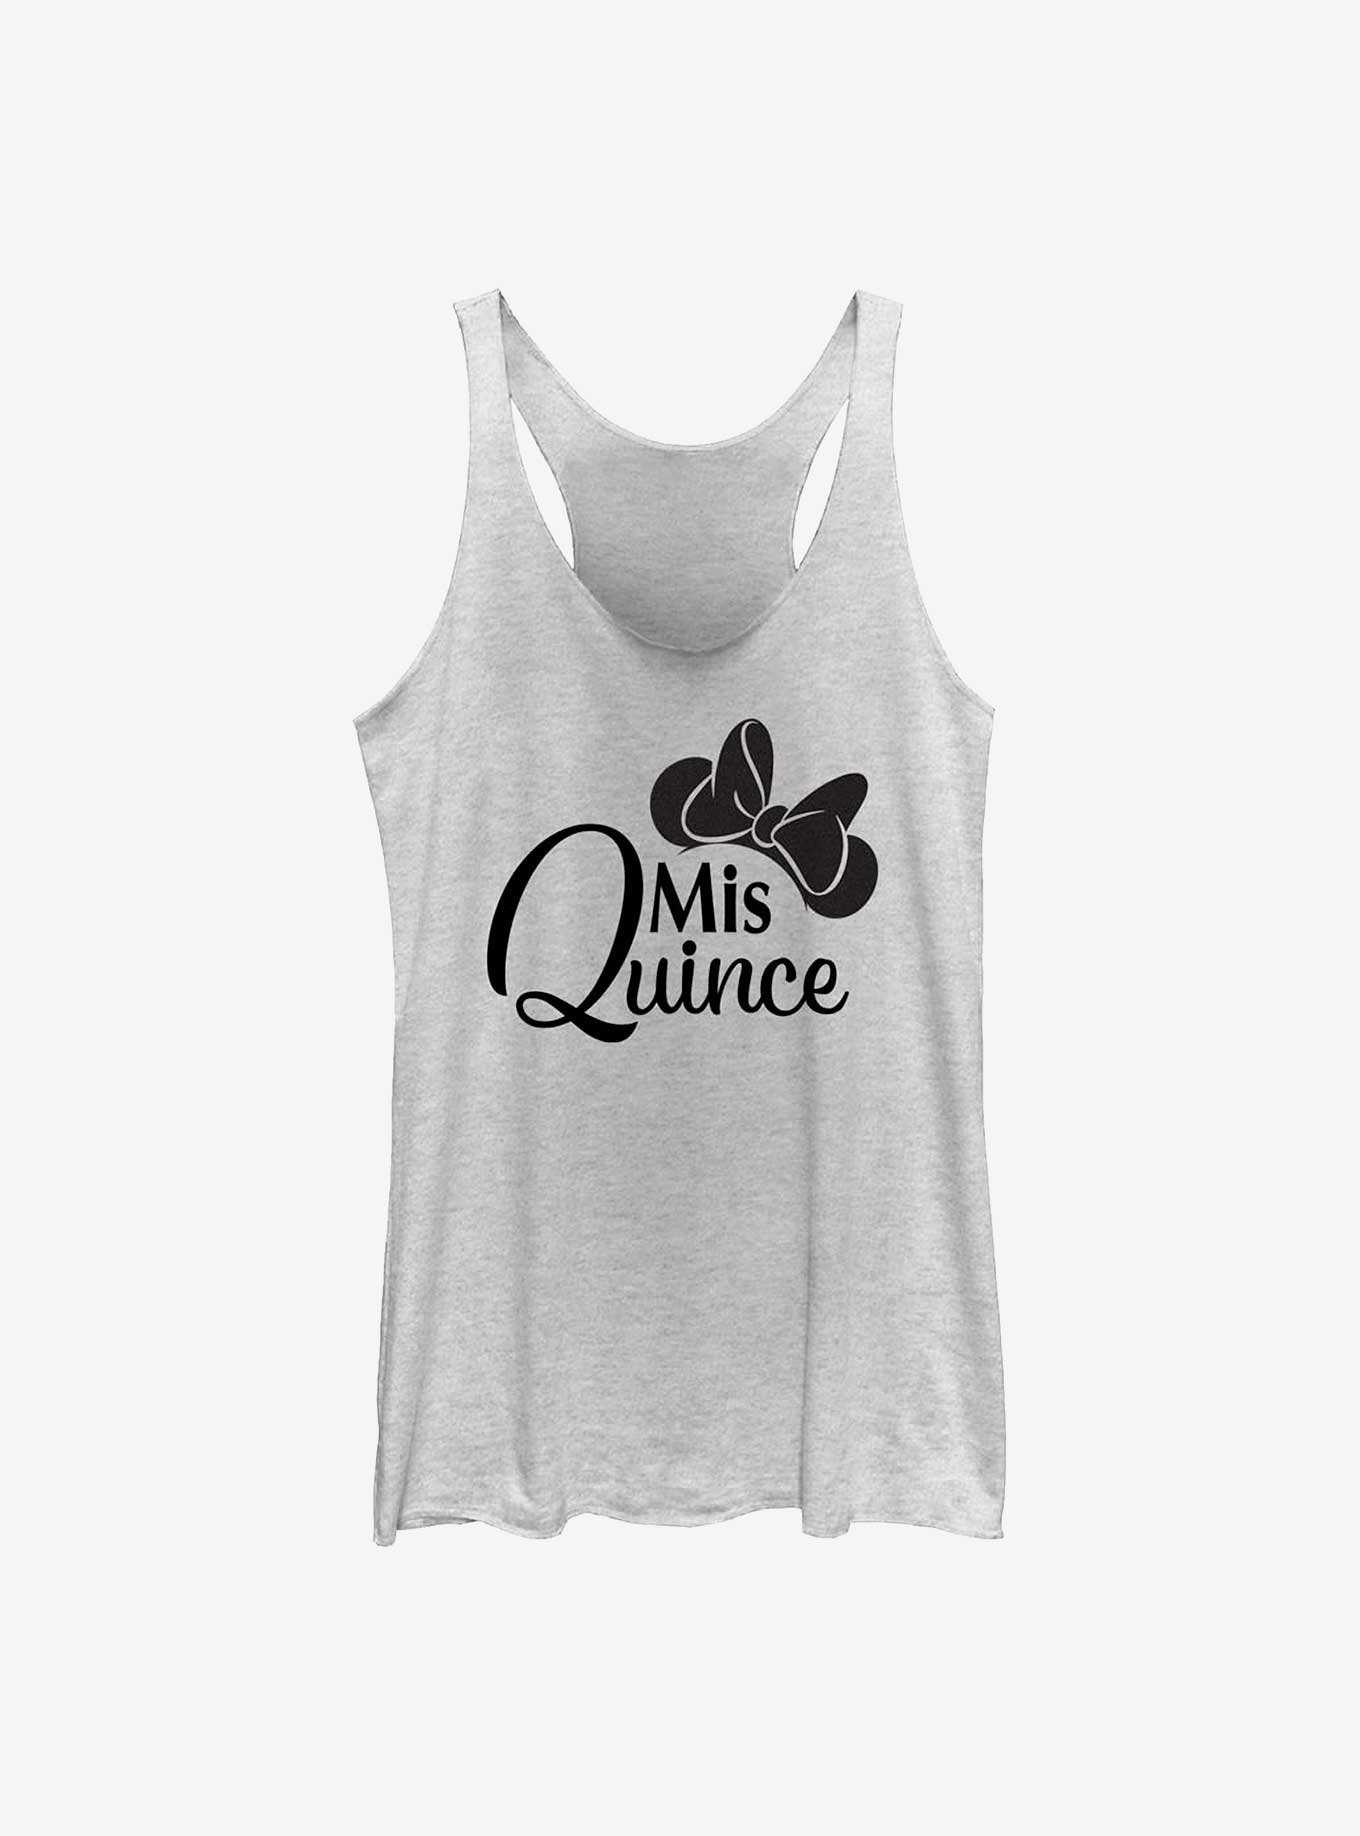 Disney Minnie Mouse Miss Quince Girls Tank, , hi-res